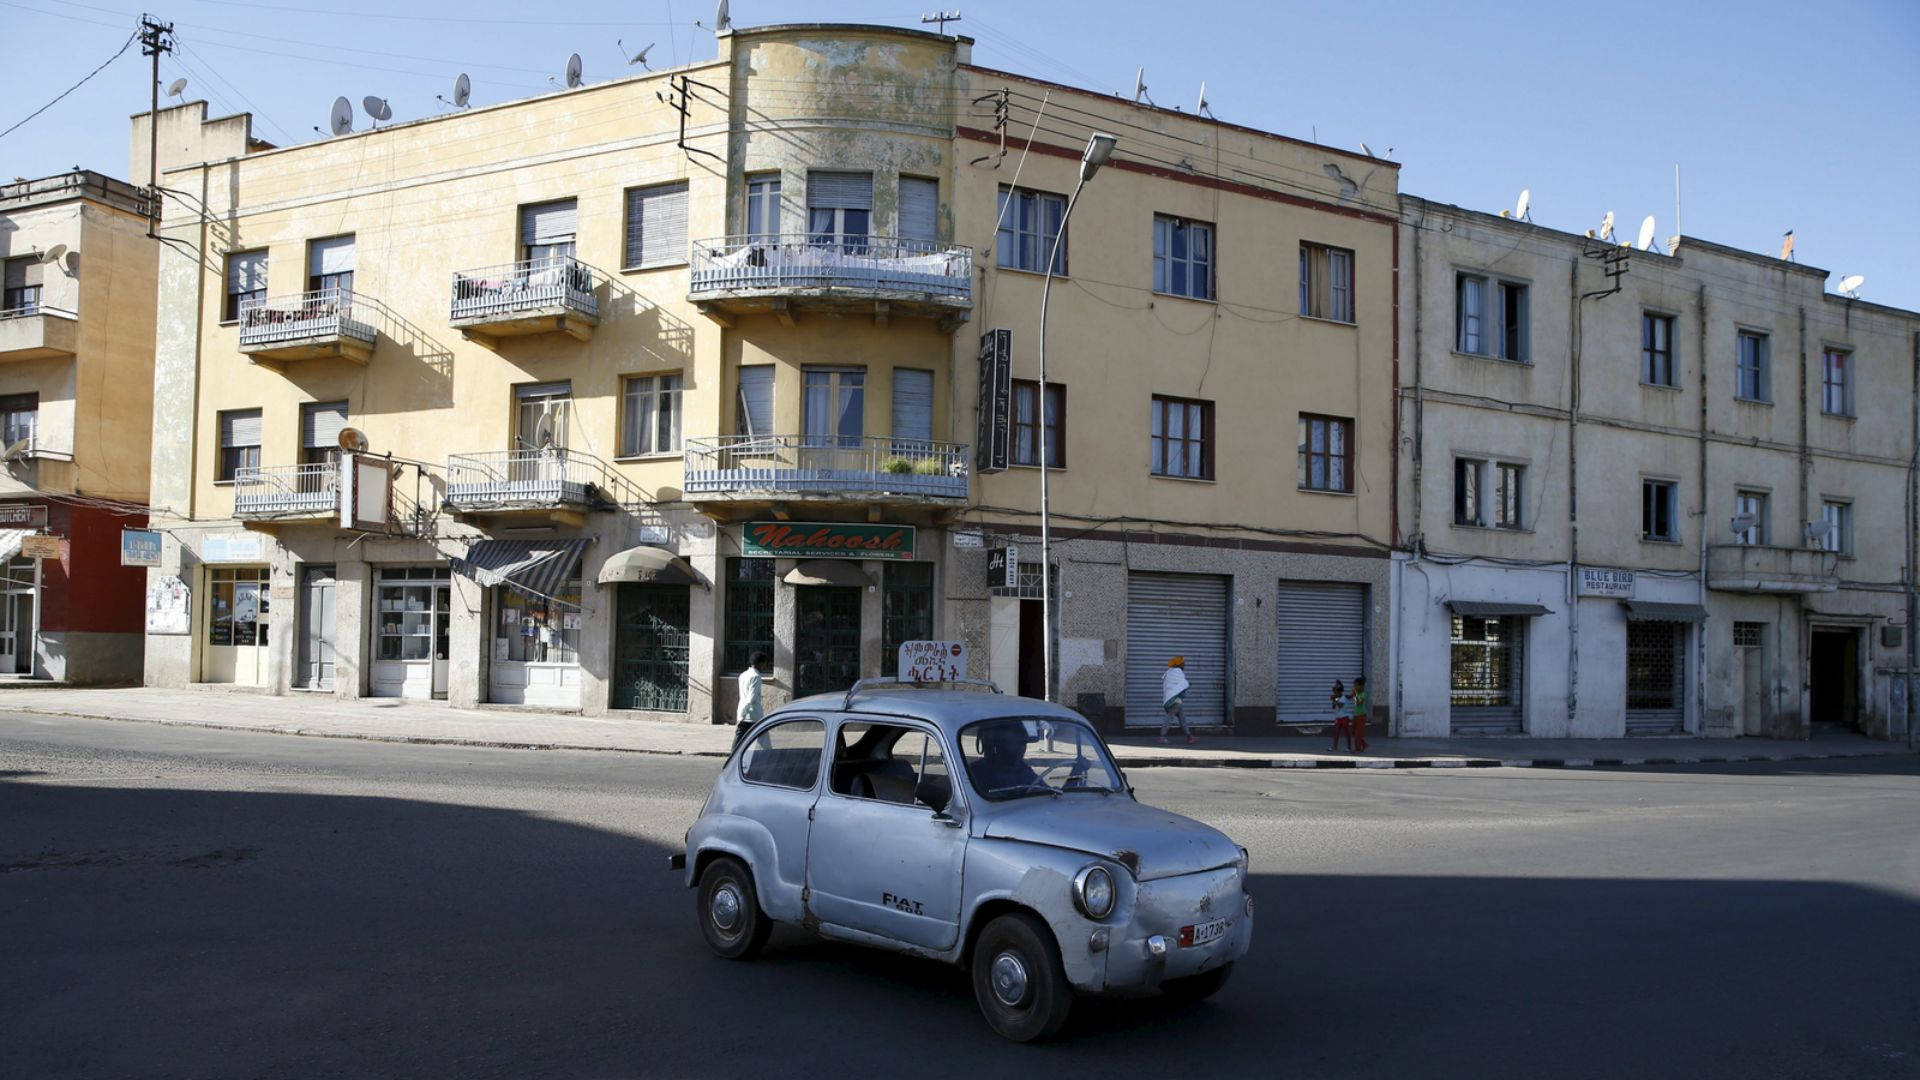 Eritrea Car In Front Of Building Background